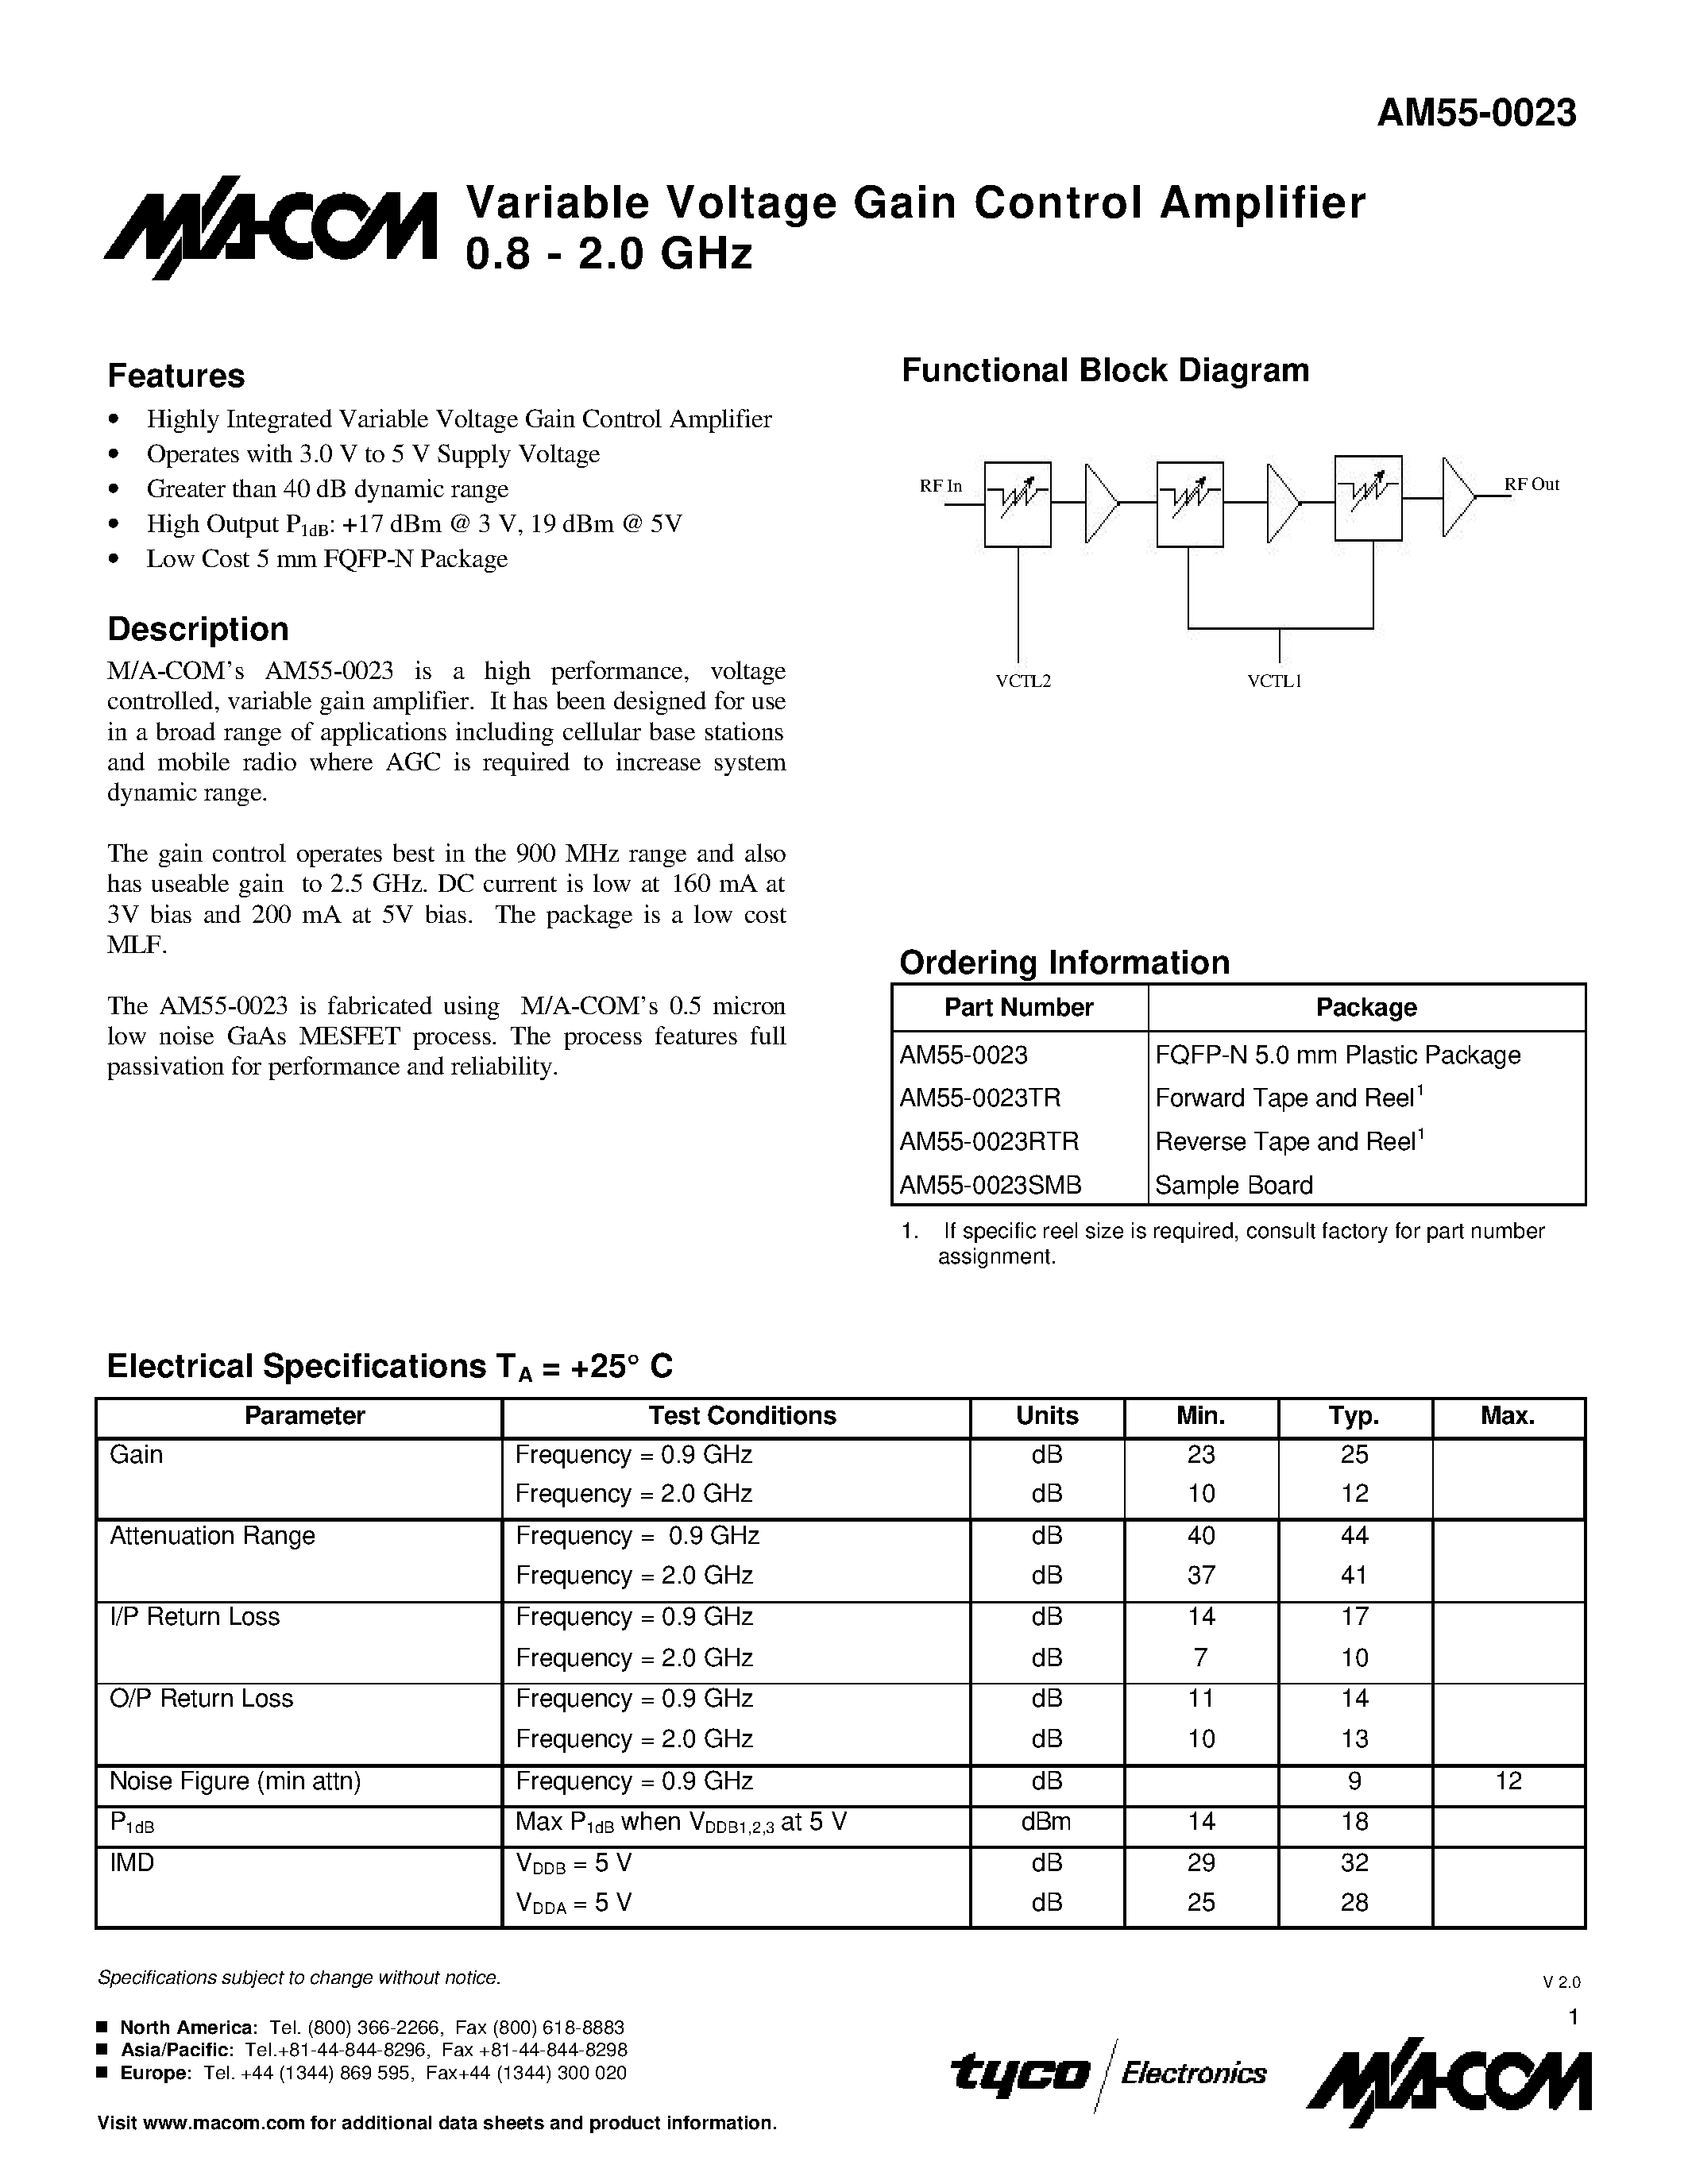 Datasheet AM55-0023 - Variable Voltage Gain Control Amplifier 0.8 - 2.0 GHz page 1